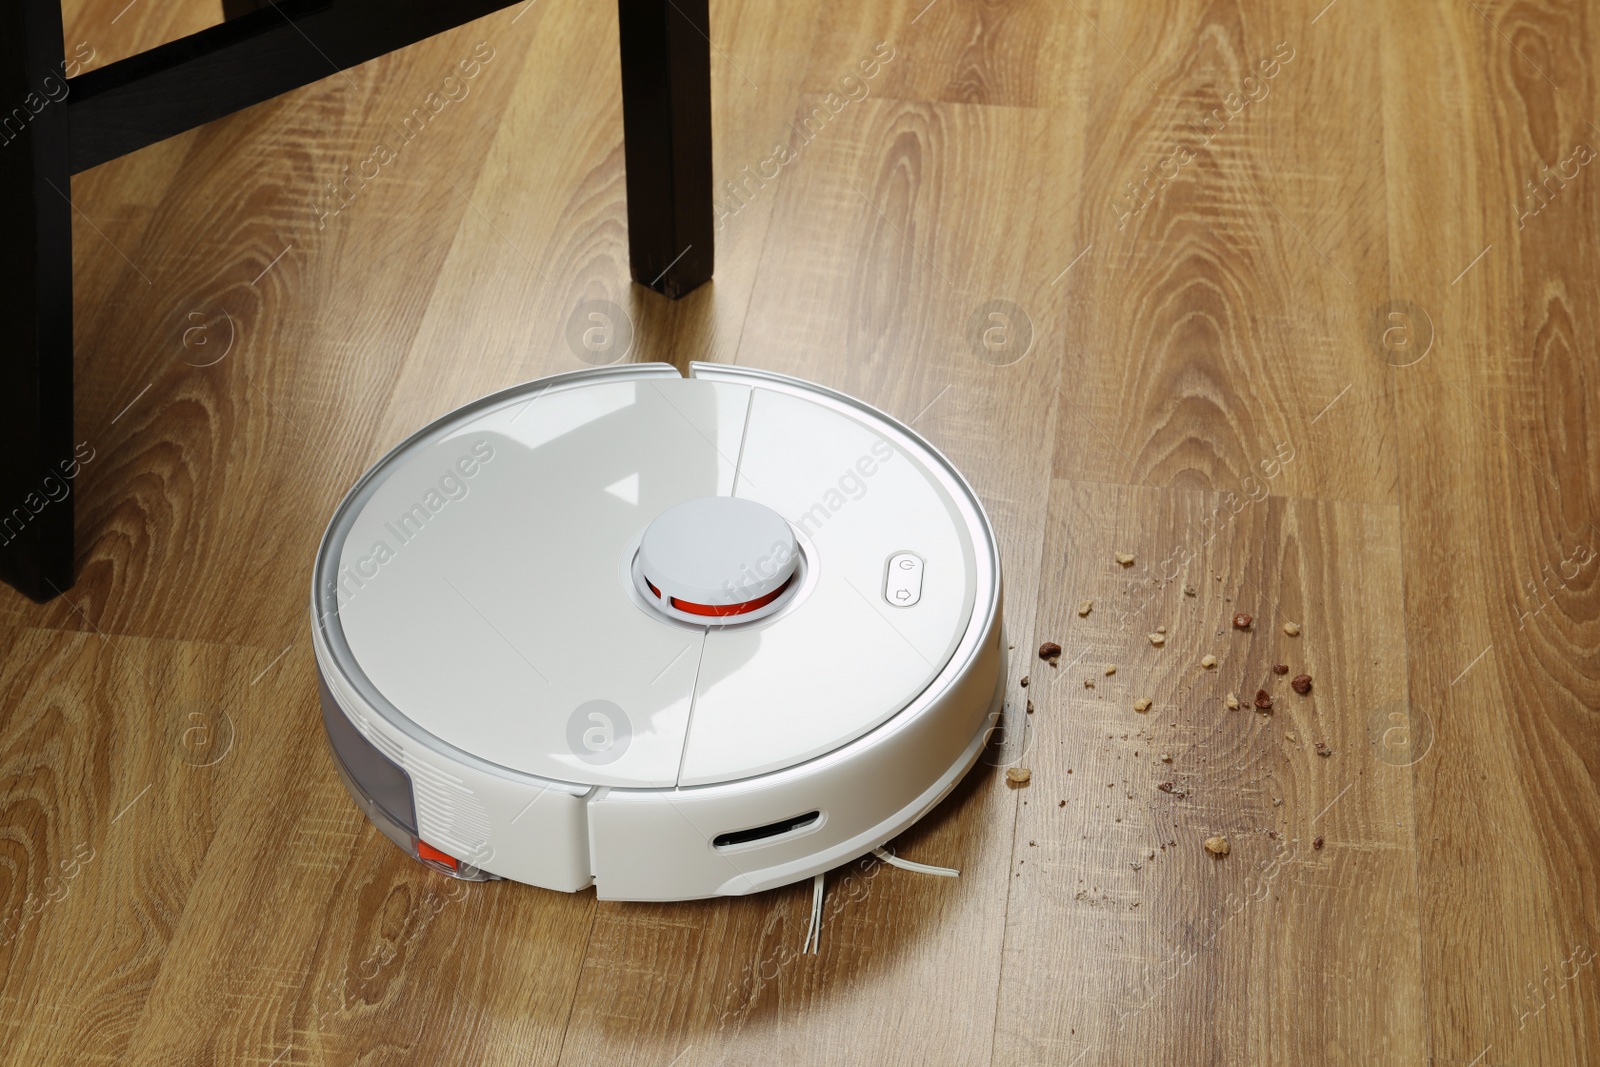 Photo of Robotic vacuum cleaner removing dirt from wooden floor indoors